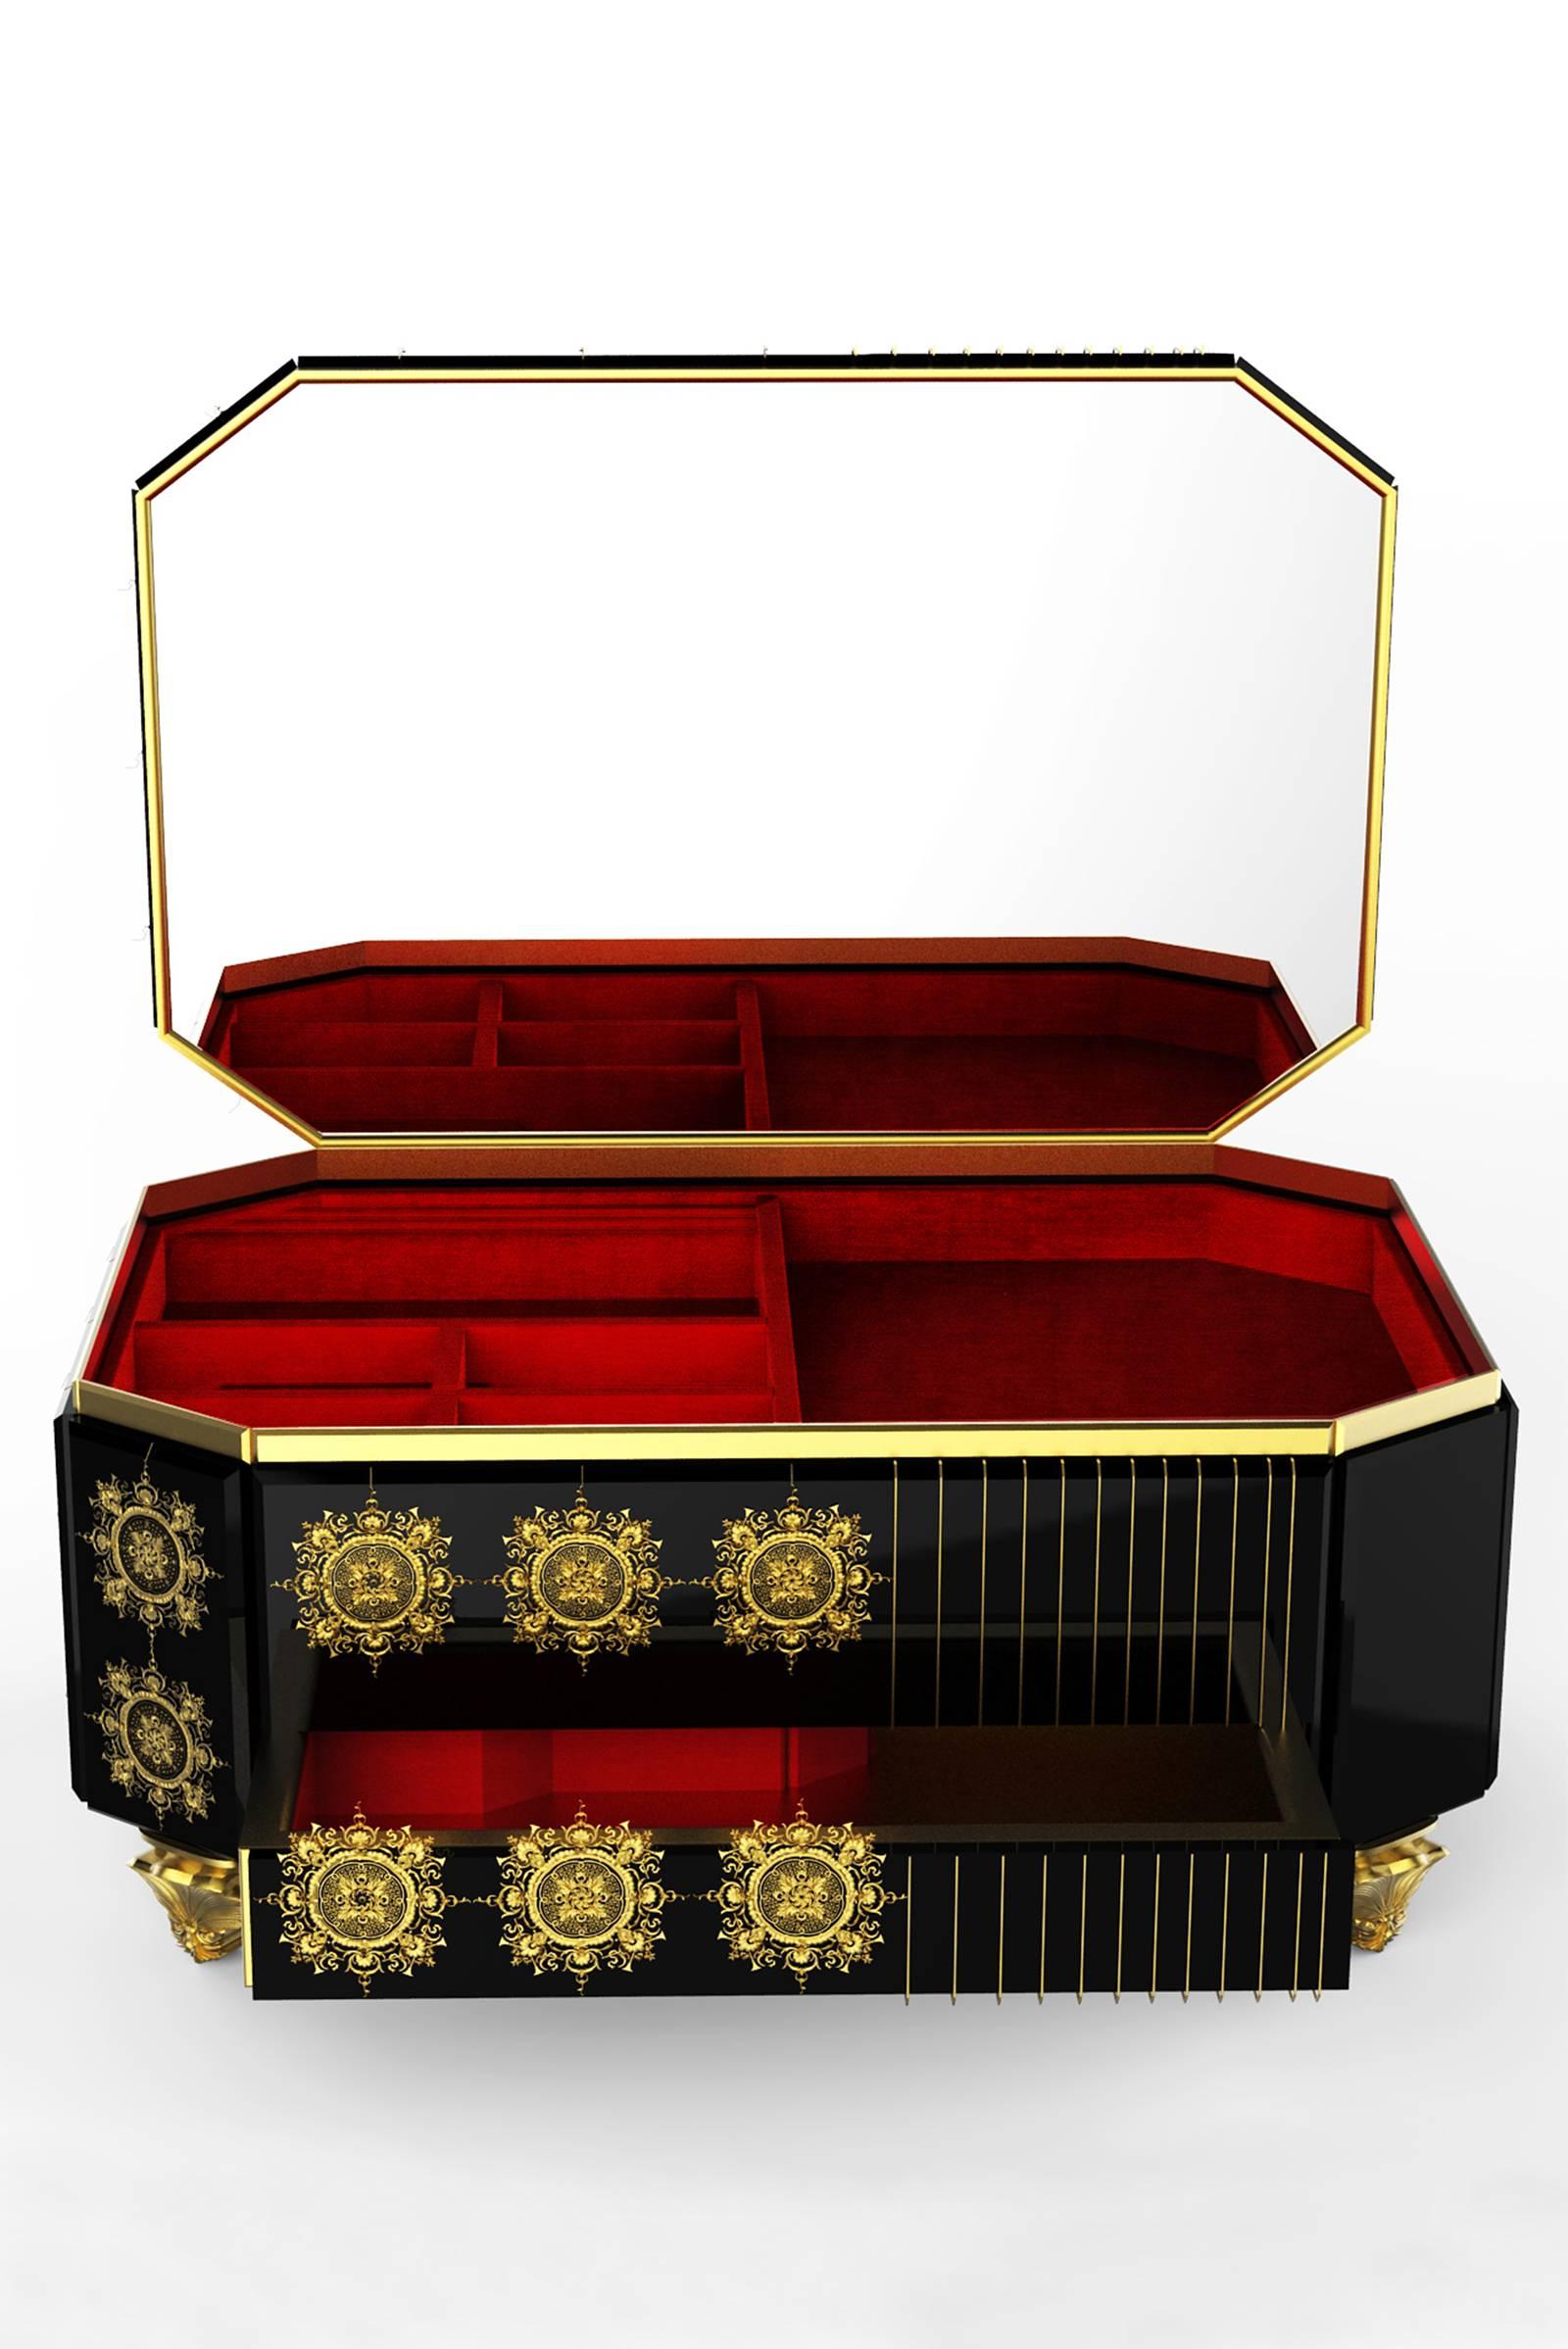 Portuguese Prince Jewelry Case Gold and Silver